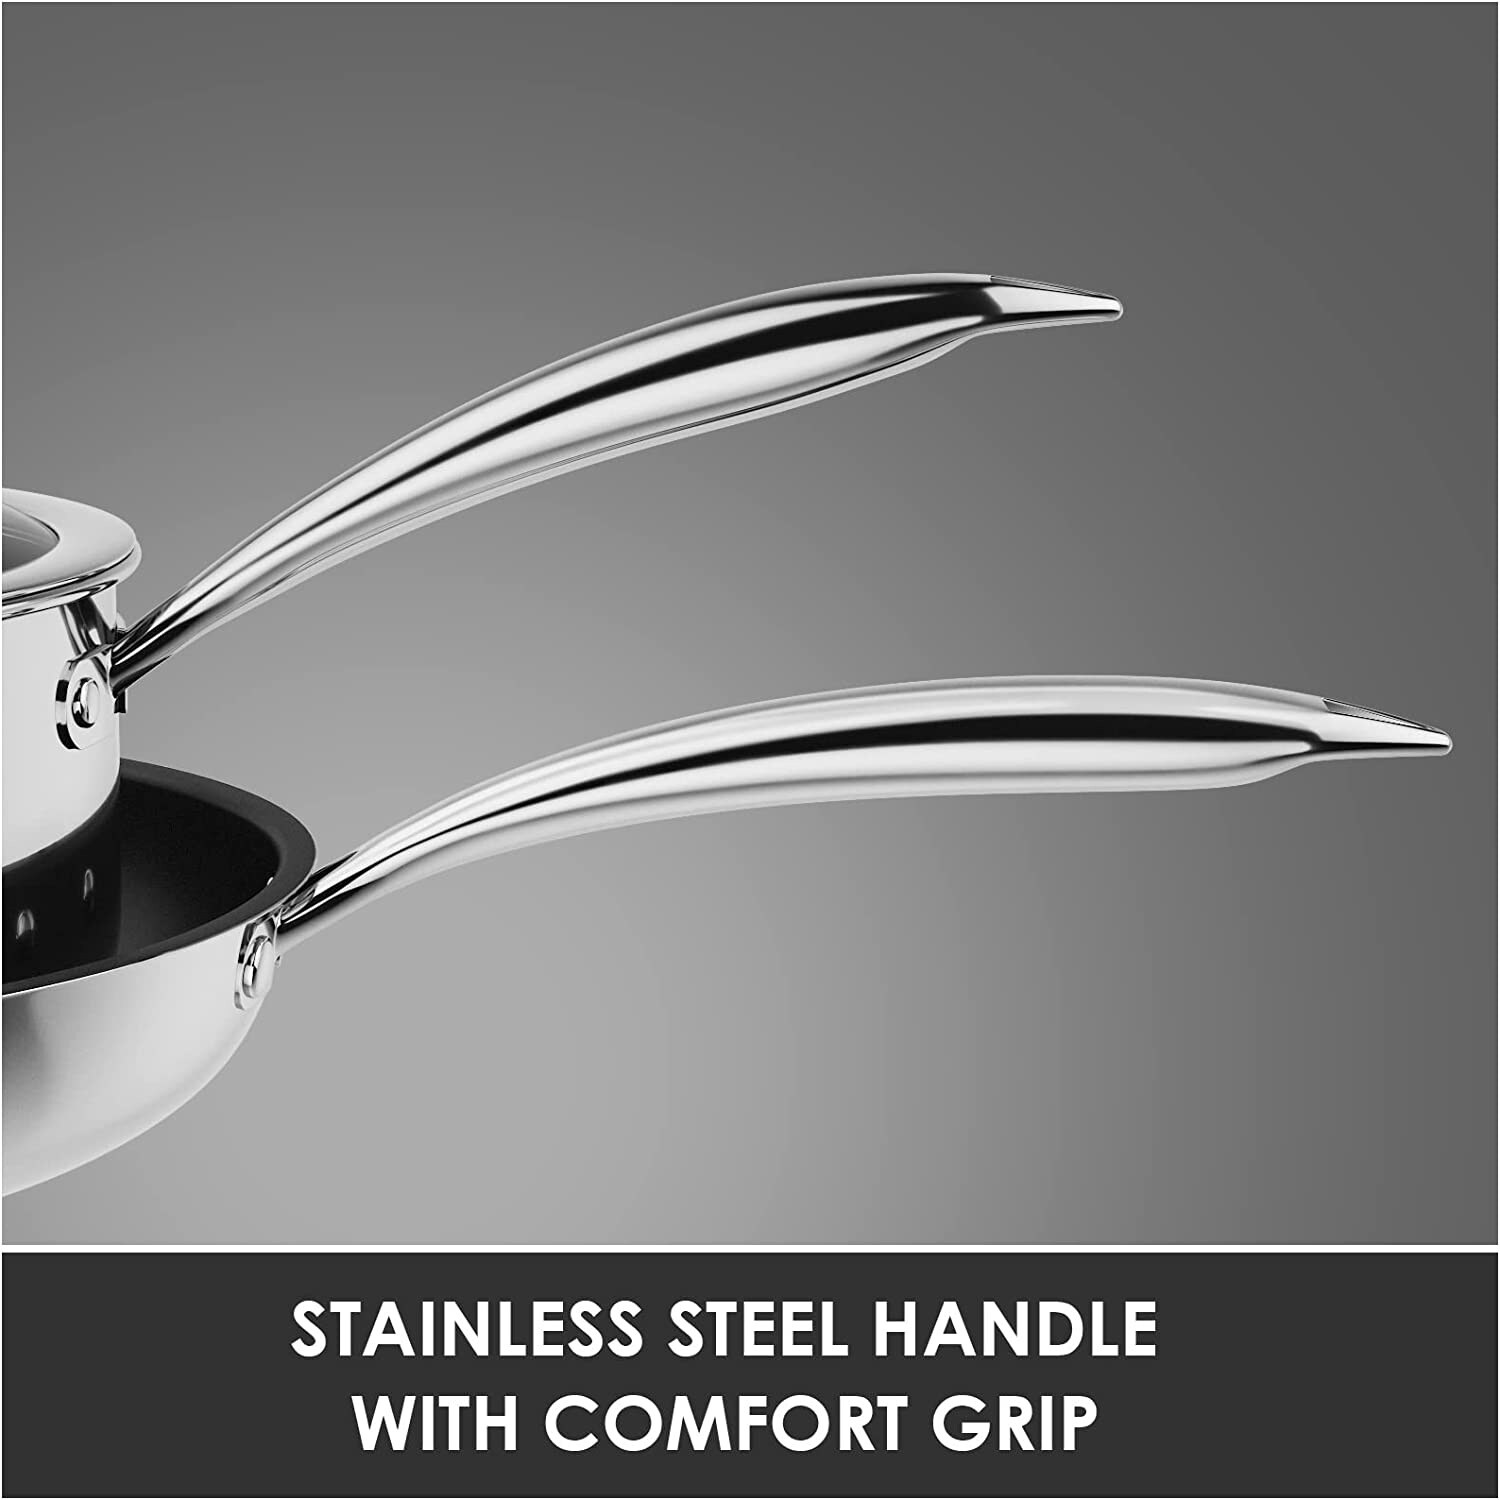 https://ak1.ostkcdn.com/images/products/is/images/direct/8832641d2e8e2c46e178b4e91c9f081a89215664/Stainless-Steel-Pots-and-Pans-Set%2C-Induction-Cookware-4-Piece-with-Lid%2C-Cookware-Sets-for-Oven-%26amp%3B-Dishwasher-Safe-By-MOMOSTAR.jpg